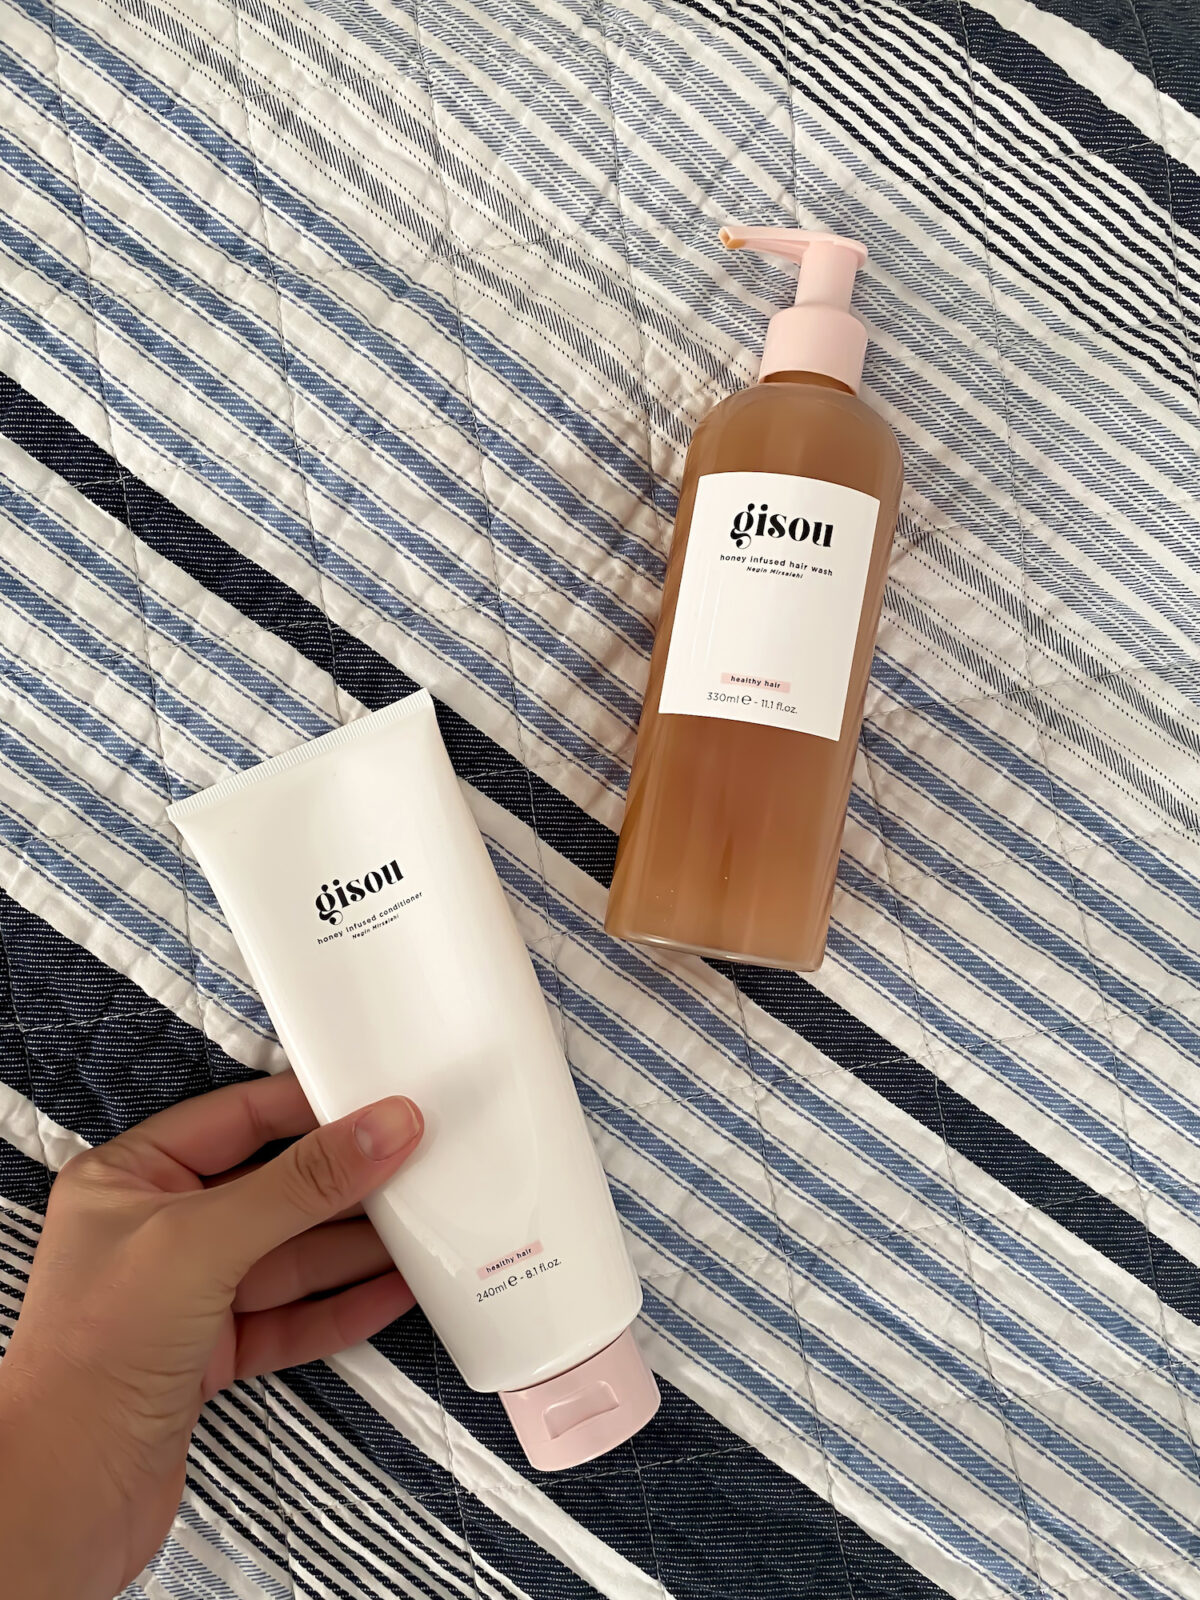 My Current Hair Care Routine